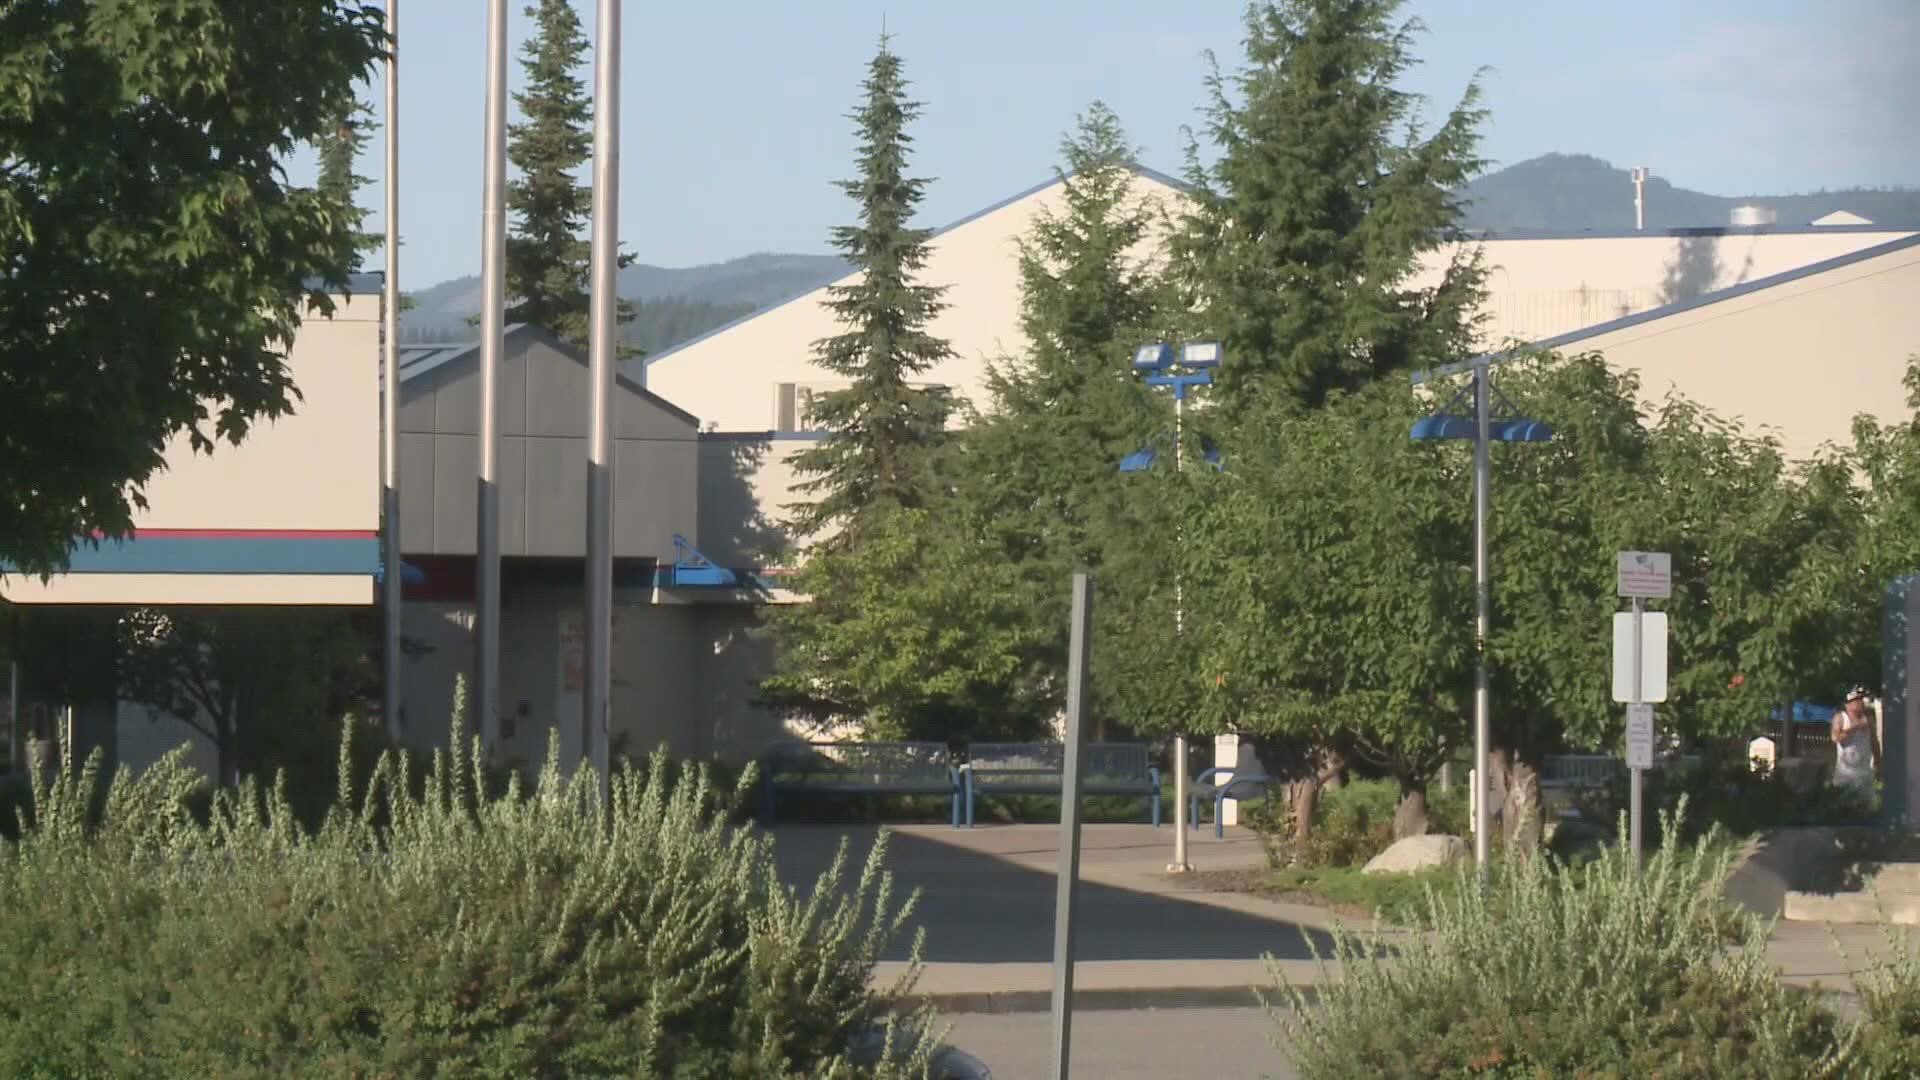 Coeur d'Alene School District is asking taxpayers to approve an $80 million funding levy.